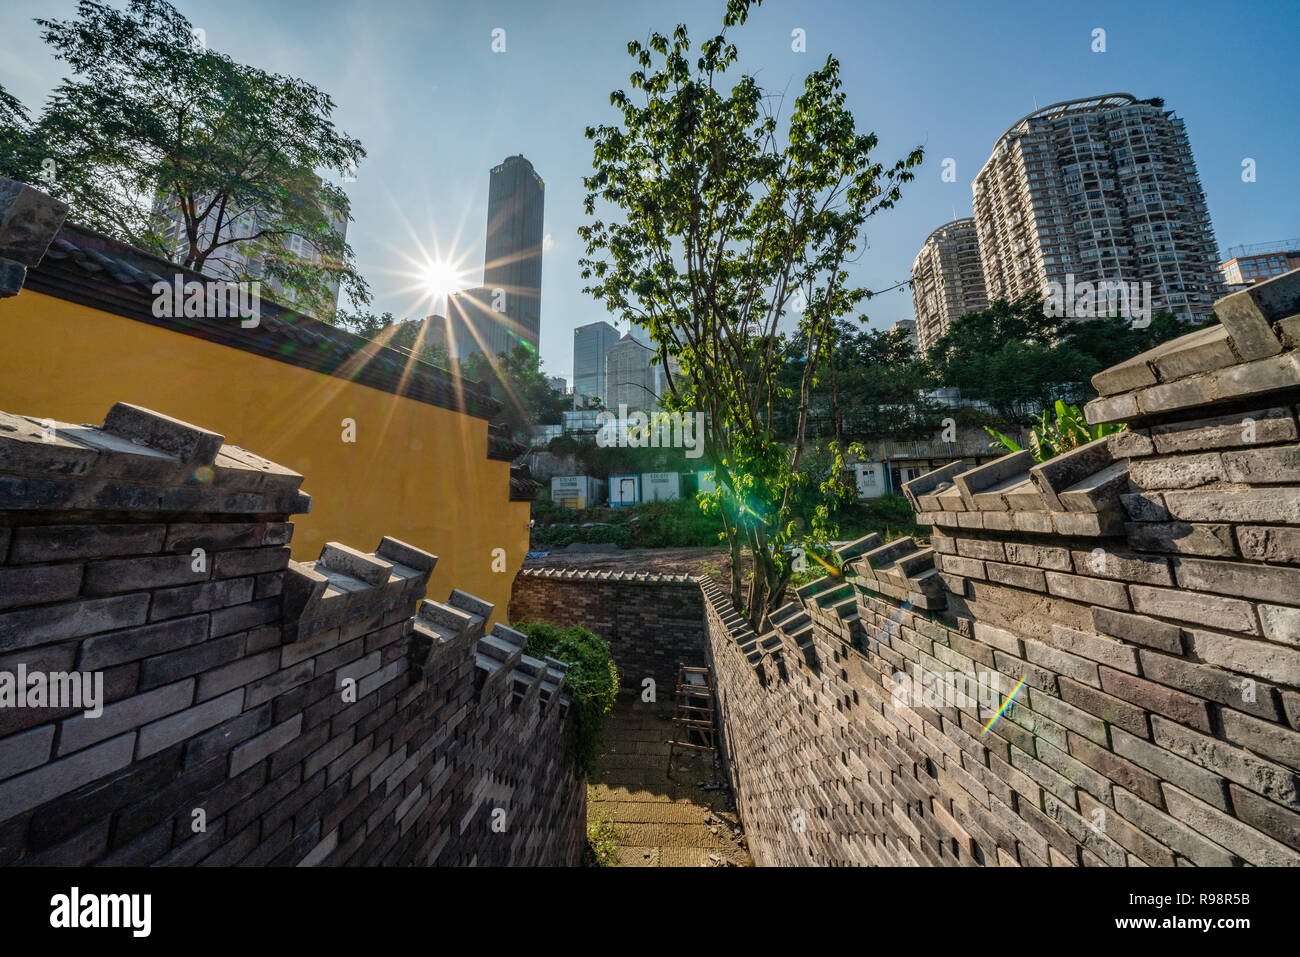 CHONGQING, CHINA - SEPTEMBER 19: Traditional Chinese architecture at Xia Hong Xue Alley which has some of the oldest buildings in the city on Septembe Stock Photo